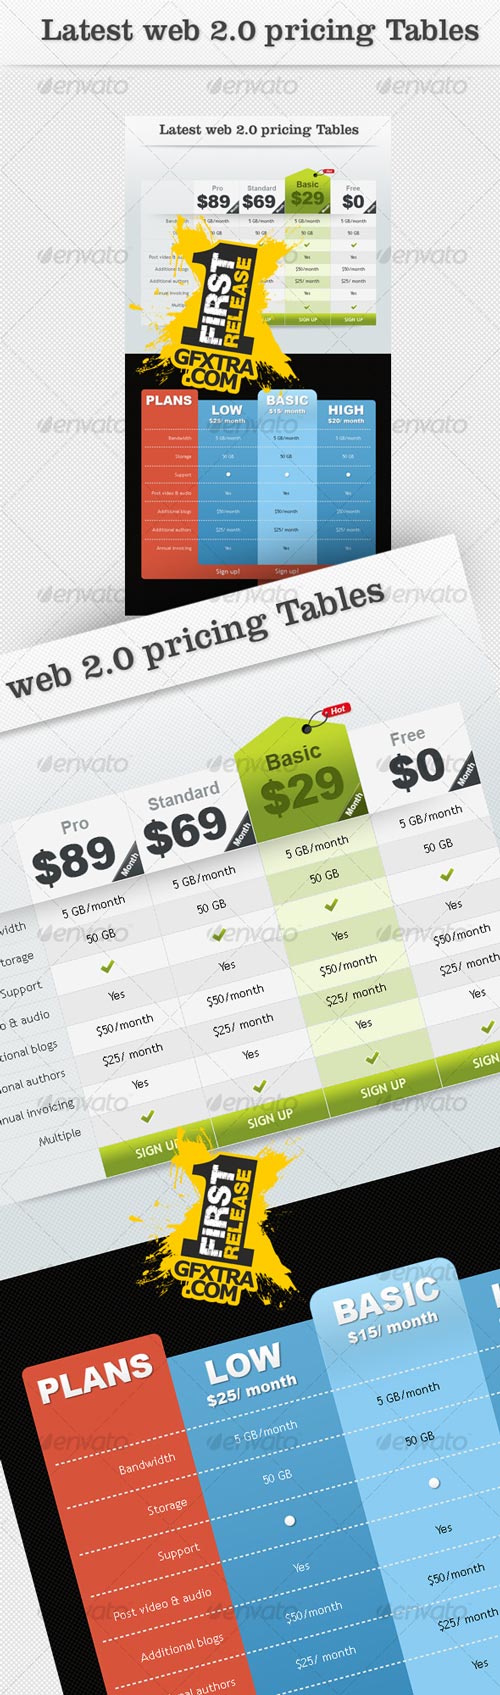 Latest Web2.0 Pricing Tables - GraphicRiver - REUPLOADED